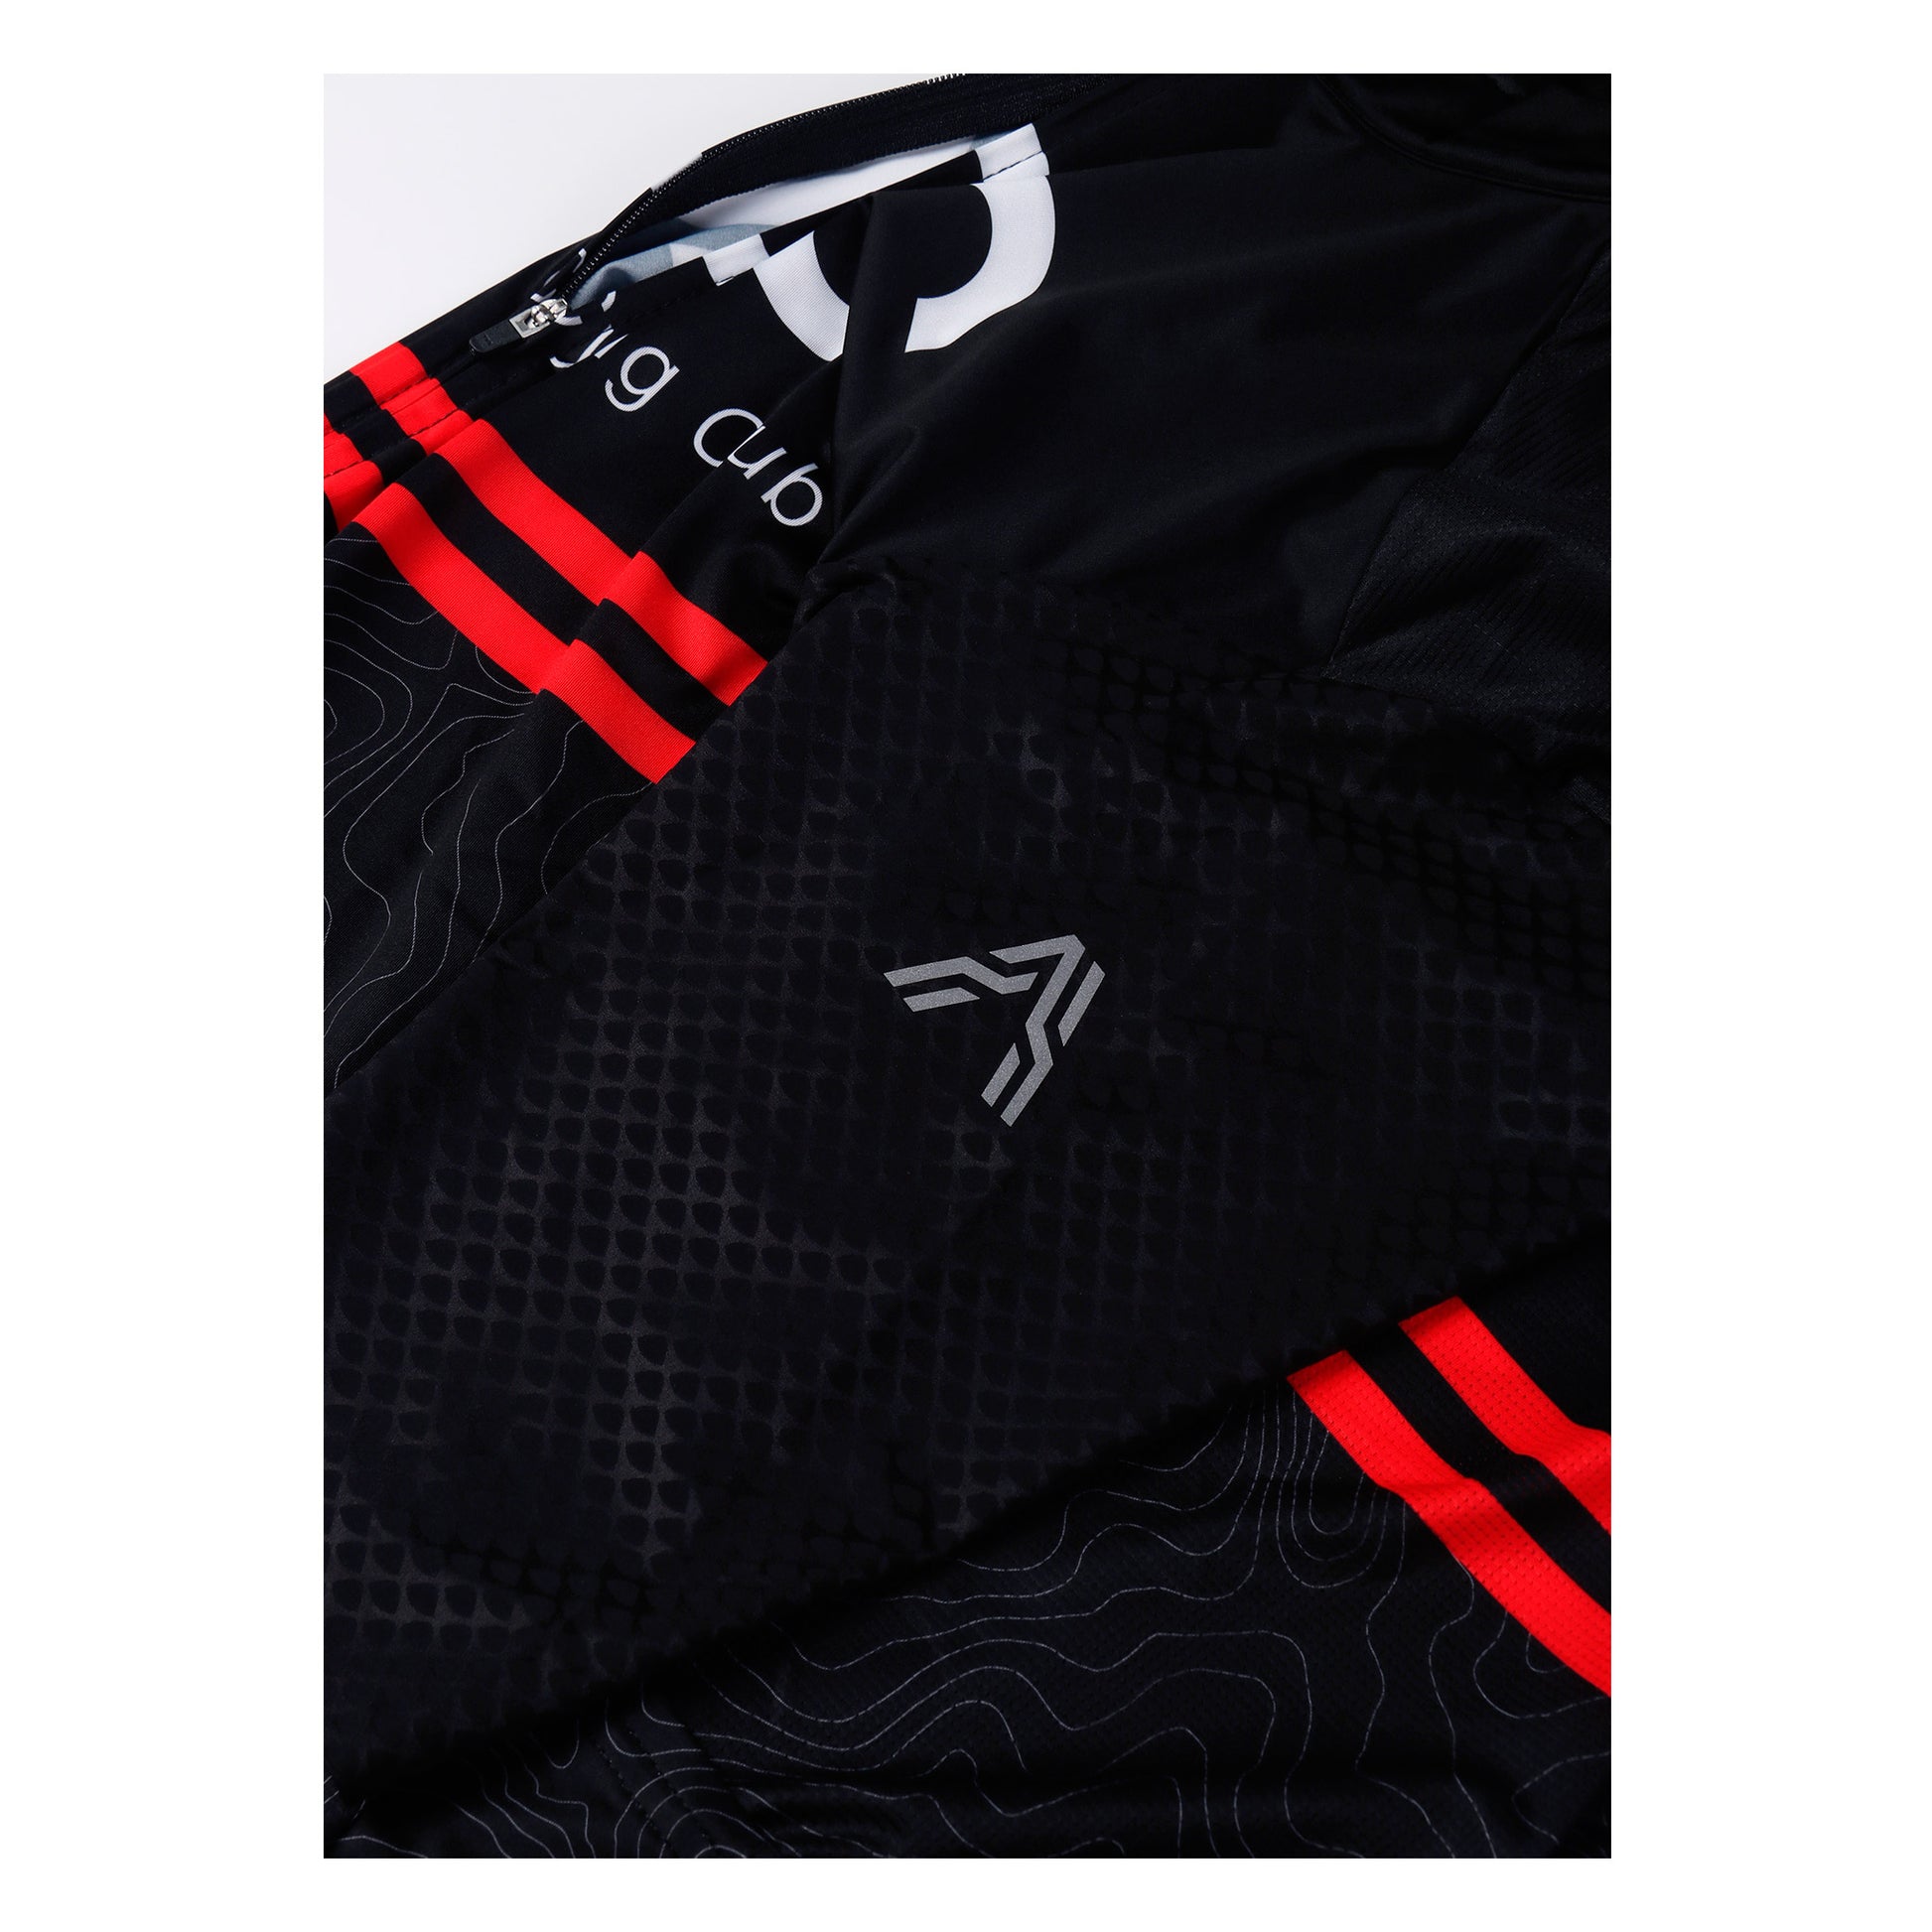 ACC Stellar sustainable cycling short sleeve jersey race cut from Ascender Cycling Club Zürich Switzerland Presentation Aerodynamic in Details from Sleeves with Reflective Monogram Logo